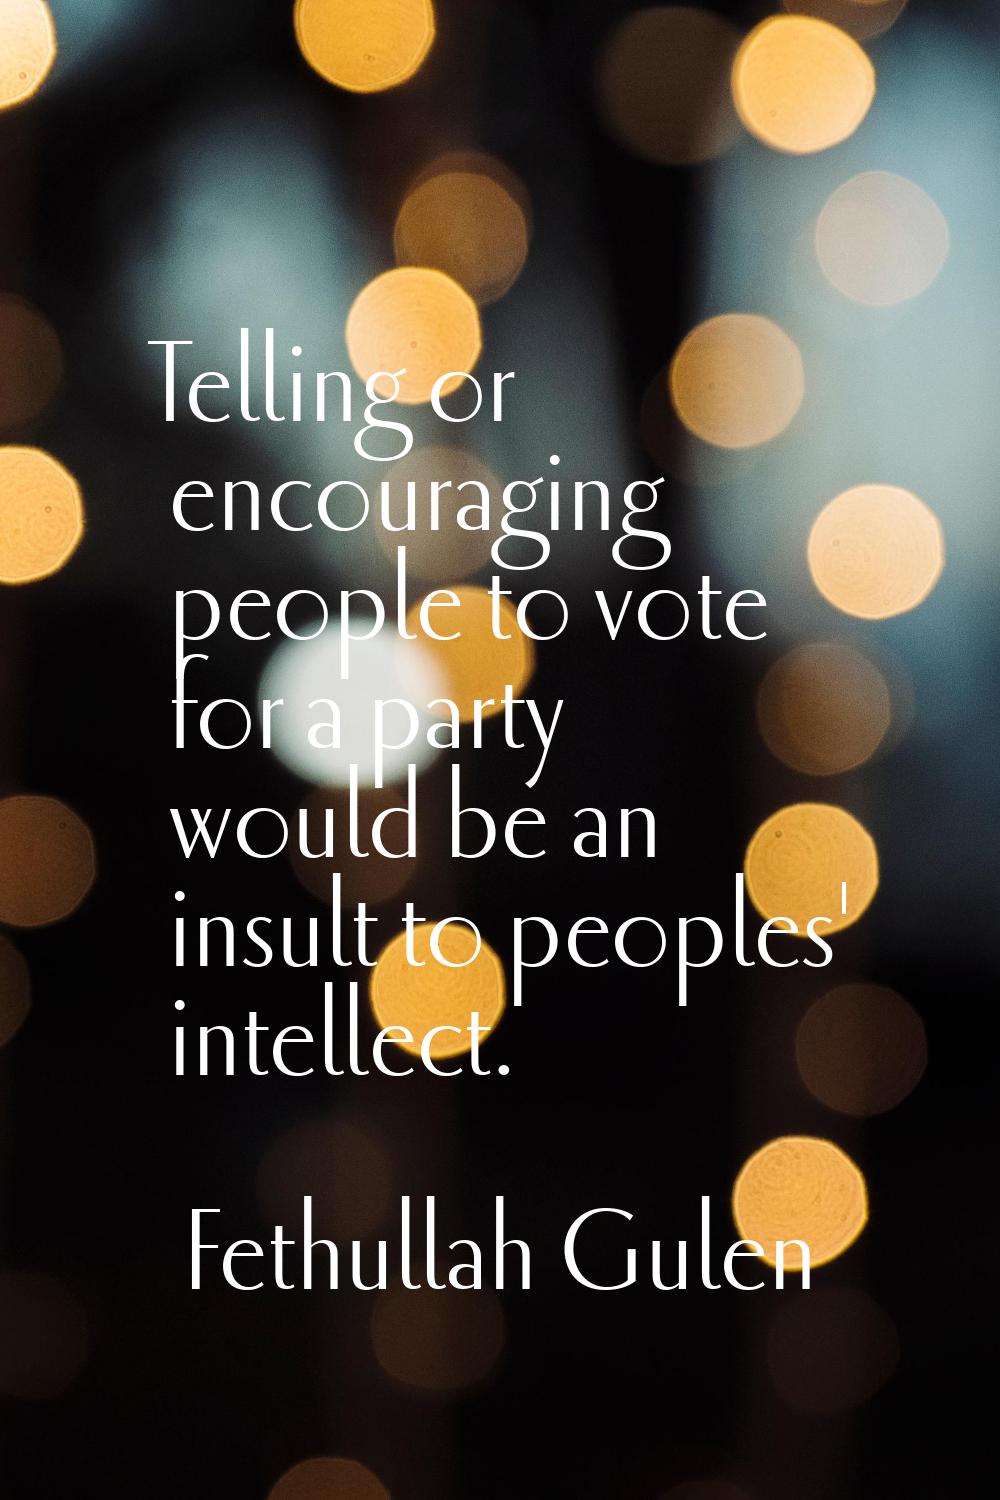 Telling or encouraging people to vote for a party would be an insult to peoples' intellect.